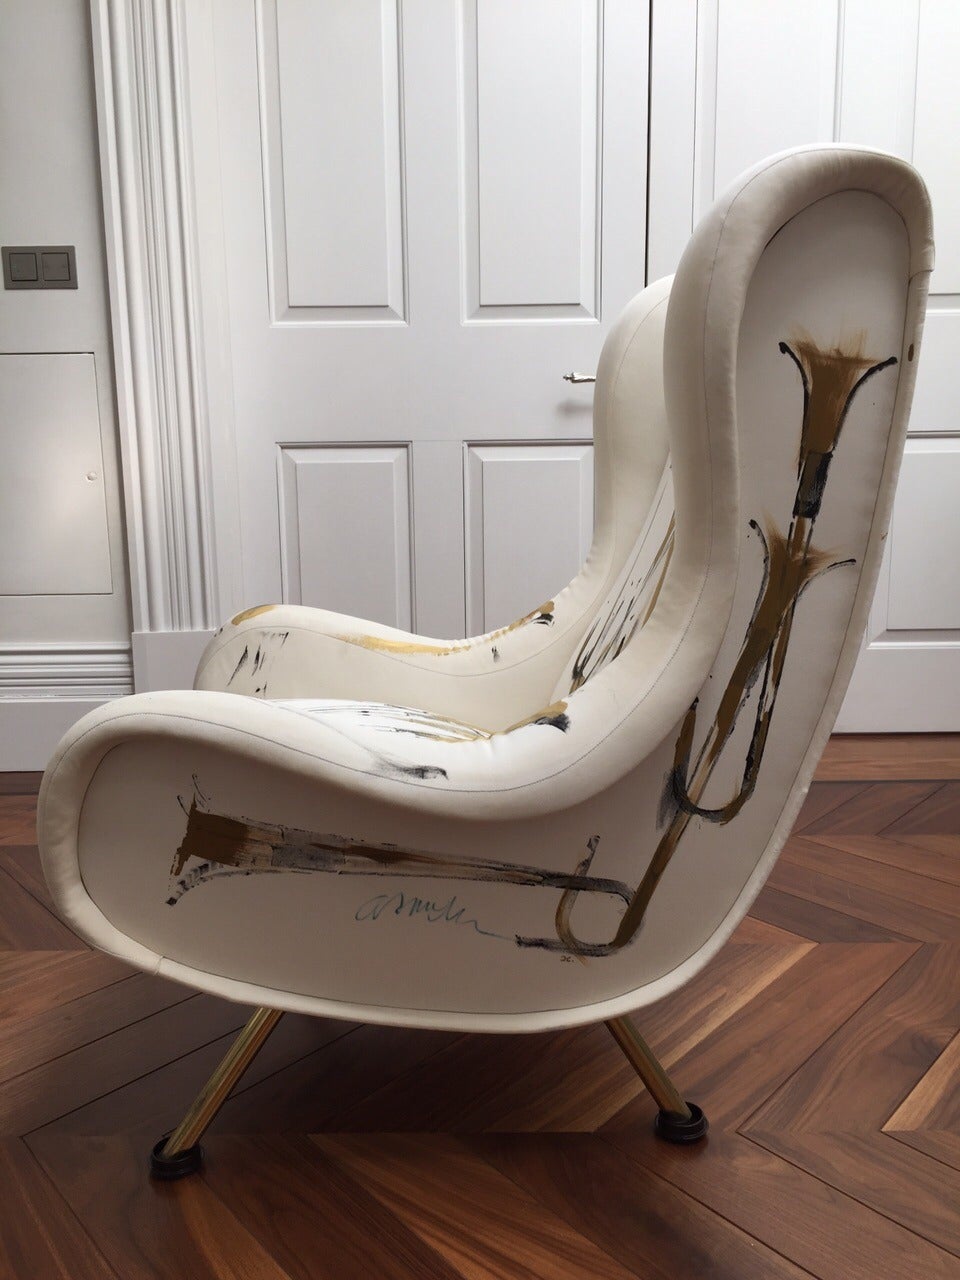 A unique pair of 1951 Senior wingback chairs by Marco Zanuso painted by the French artist Arman (Armand Fernandez). With typical violin painting.

The chairs have been commisioned by Galerie Hellenbeck in 2003 and we acquired them from the